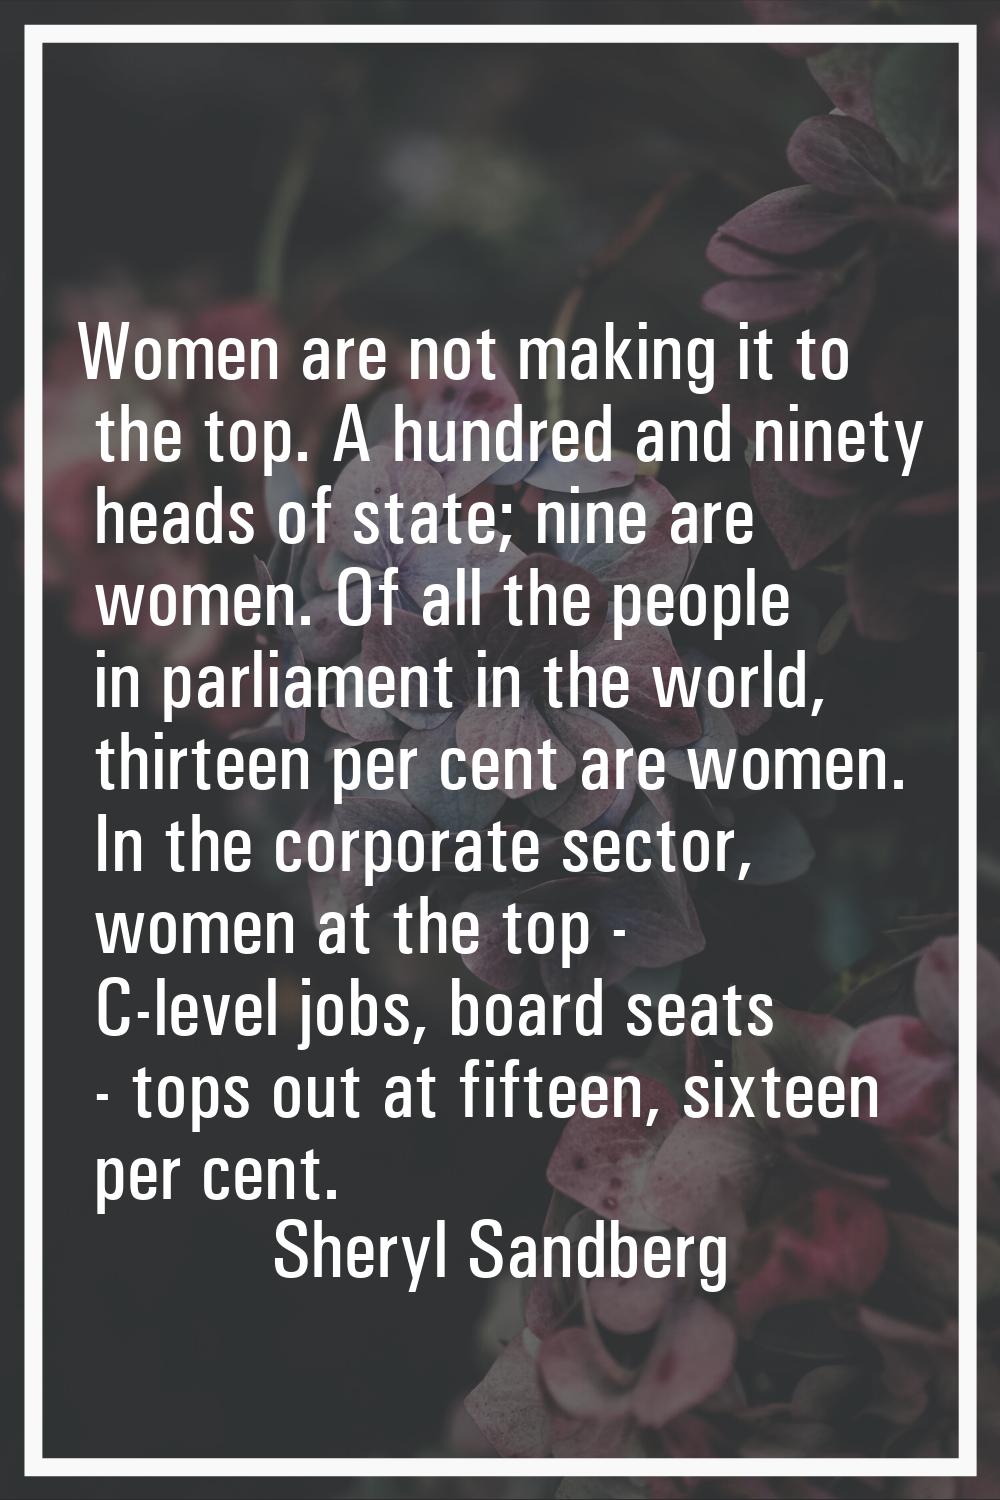 Women are not making it to the top. A hundred and ninety heads of state; nine are women. Of all the